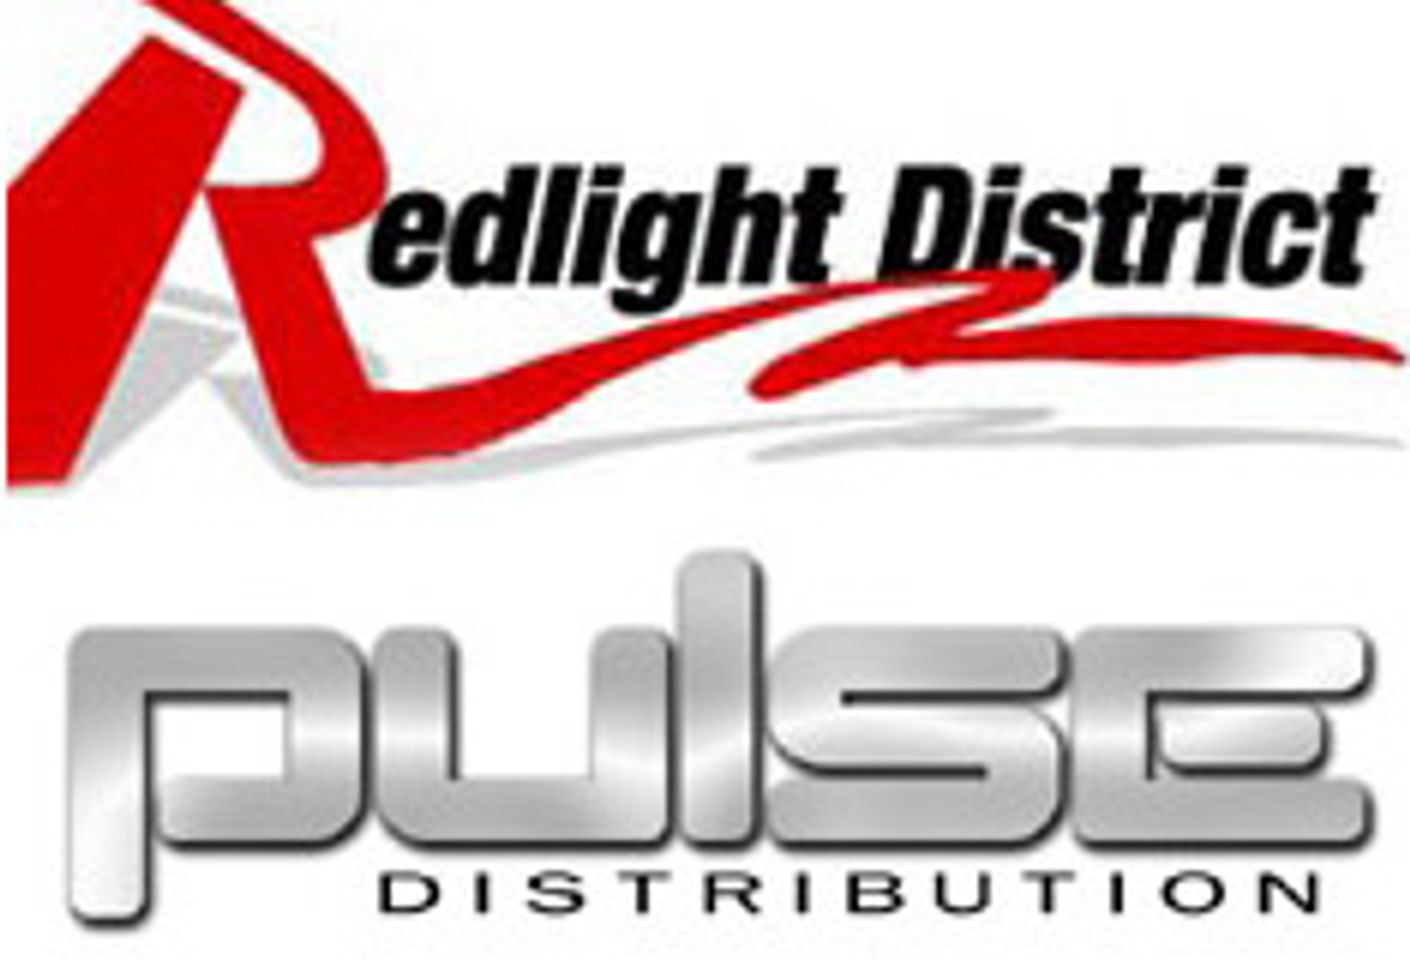 Red Light District Signs Agreement with Pulse Distribution